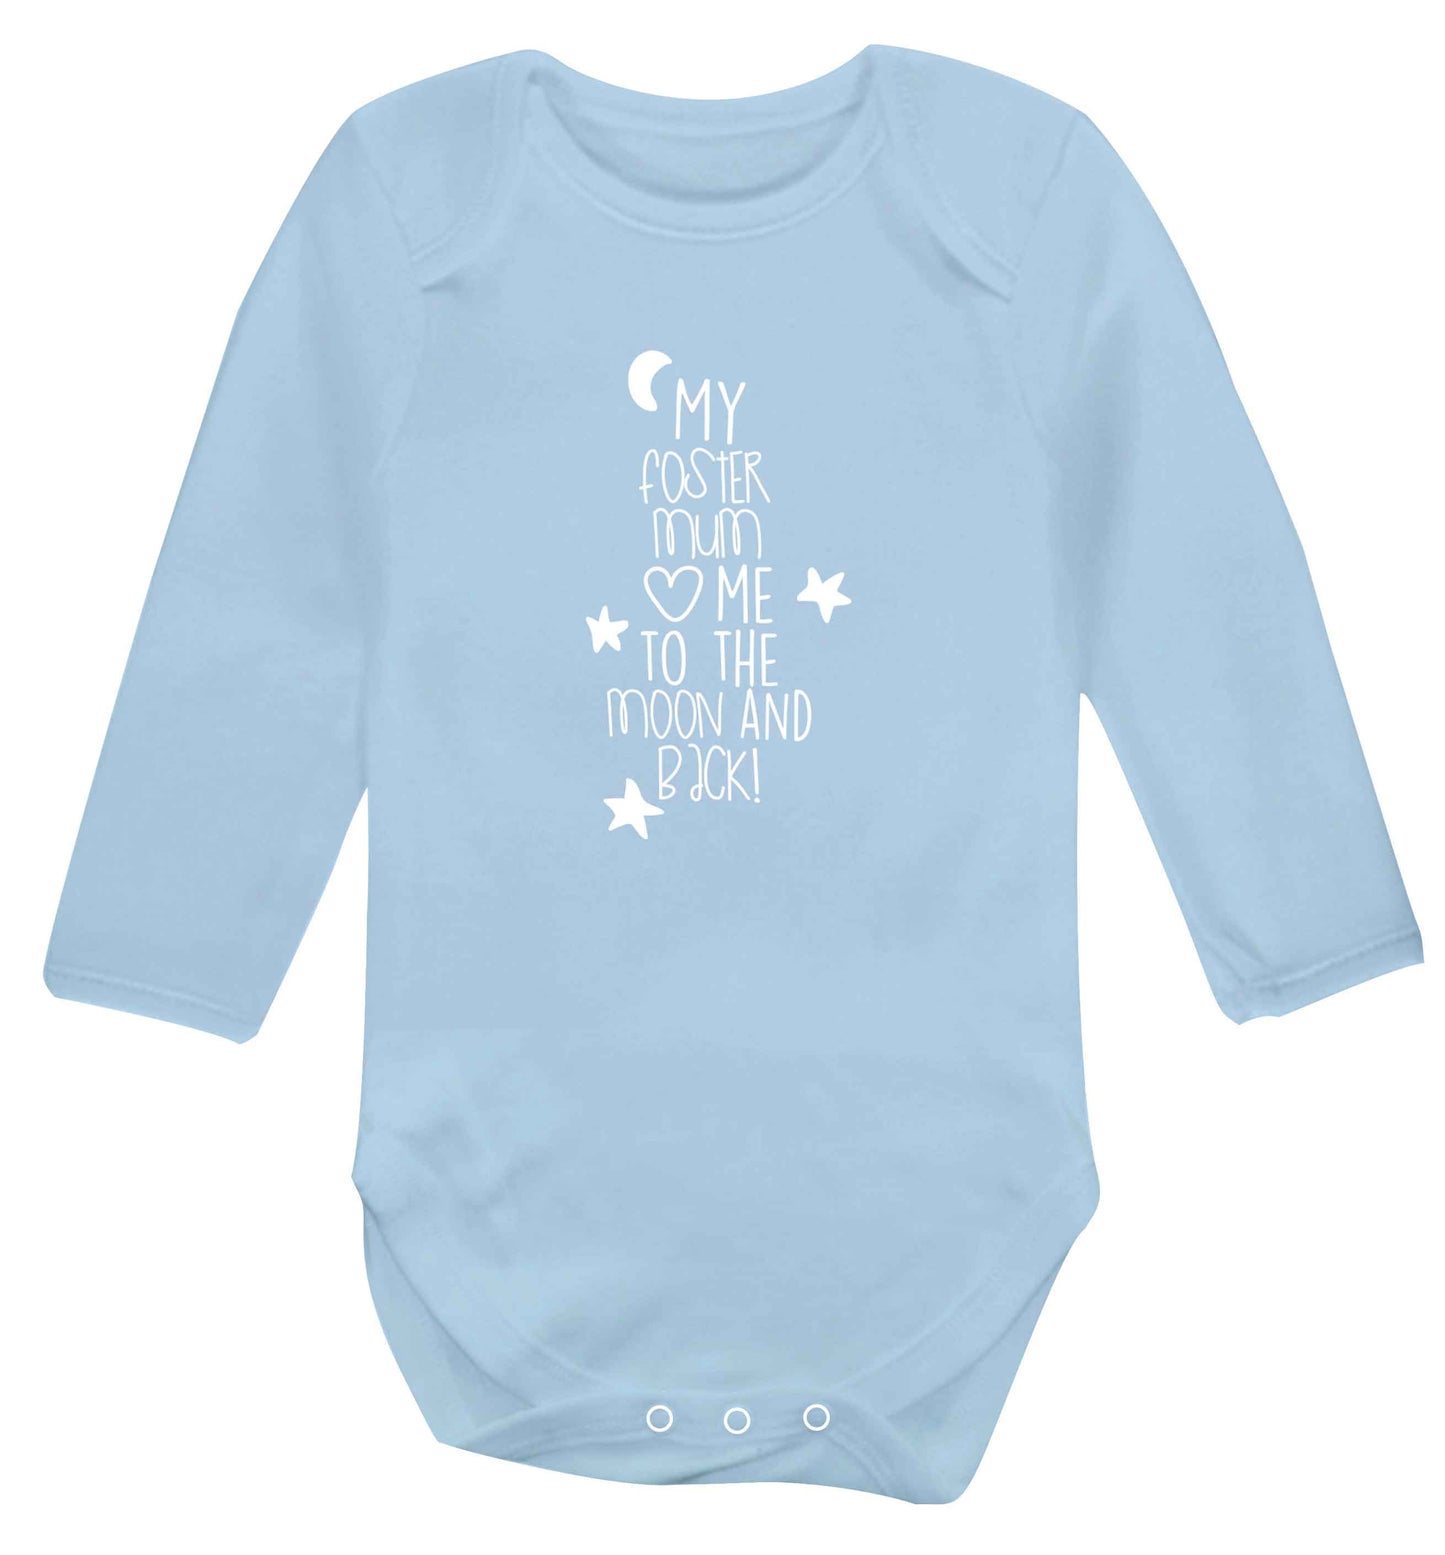 My foster mum loves me to the moon and back baby vest long sleeved pale blue 6-12 months